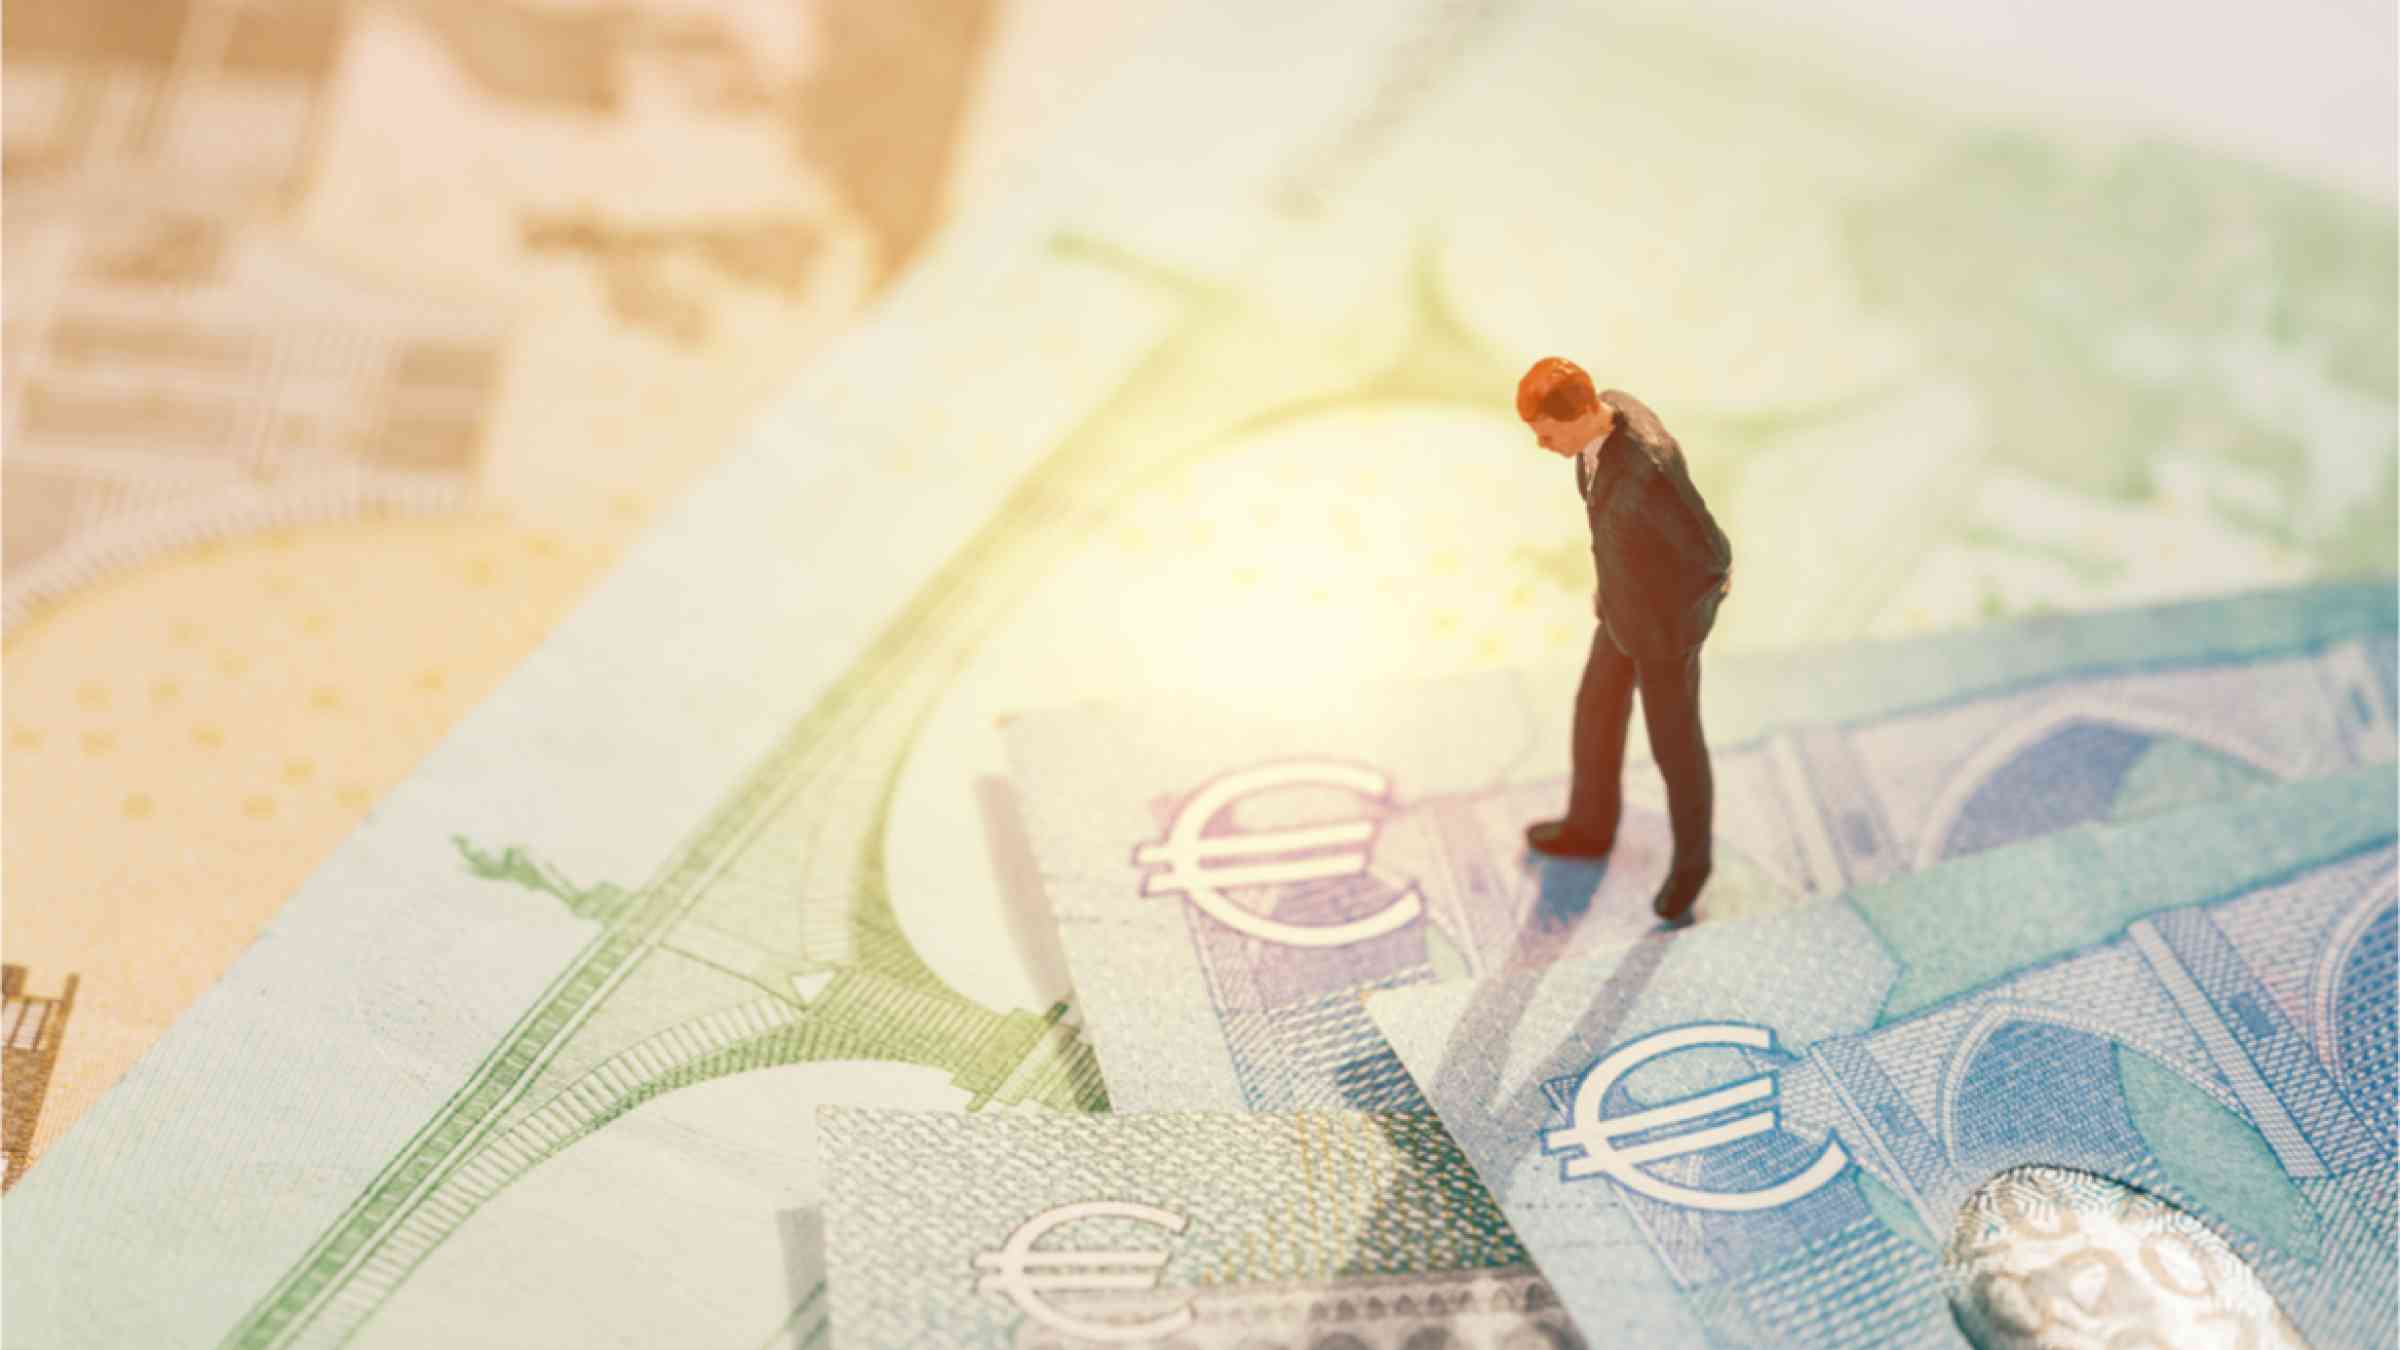 This image shows a mini business man figure looking at euro sign on the stack of banknotes.